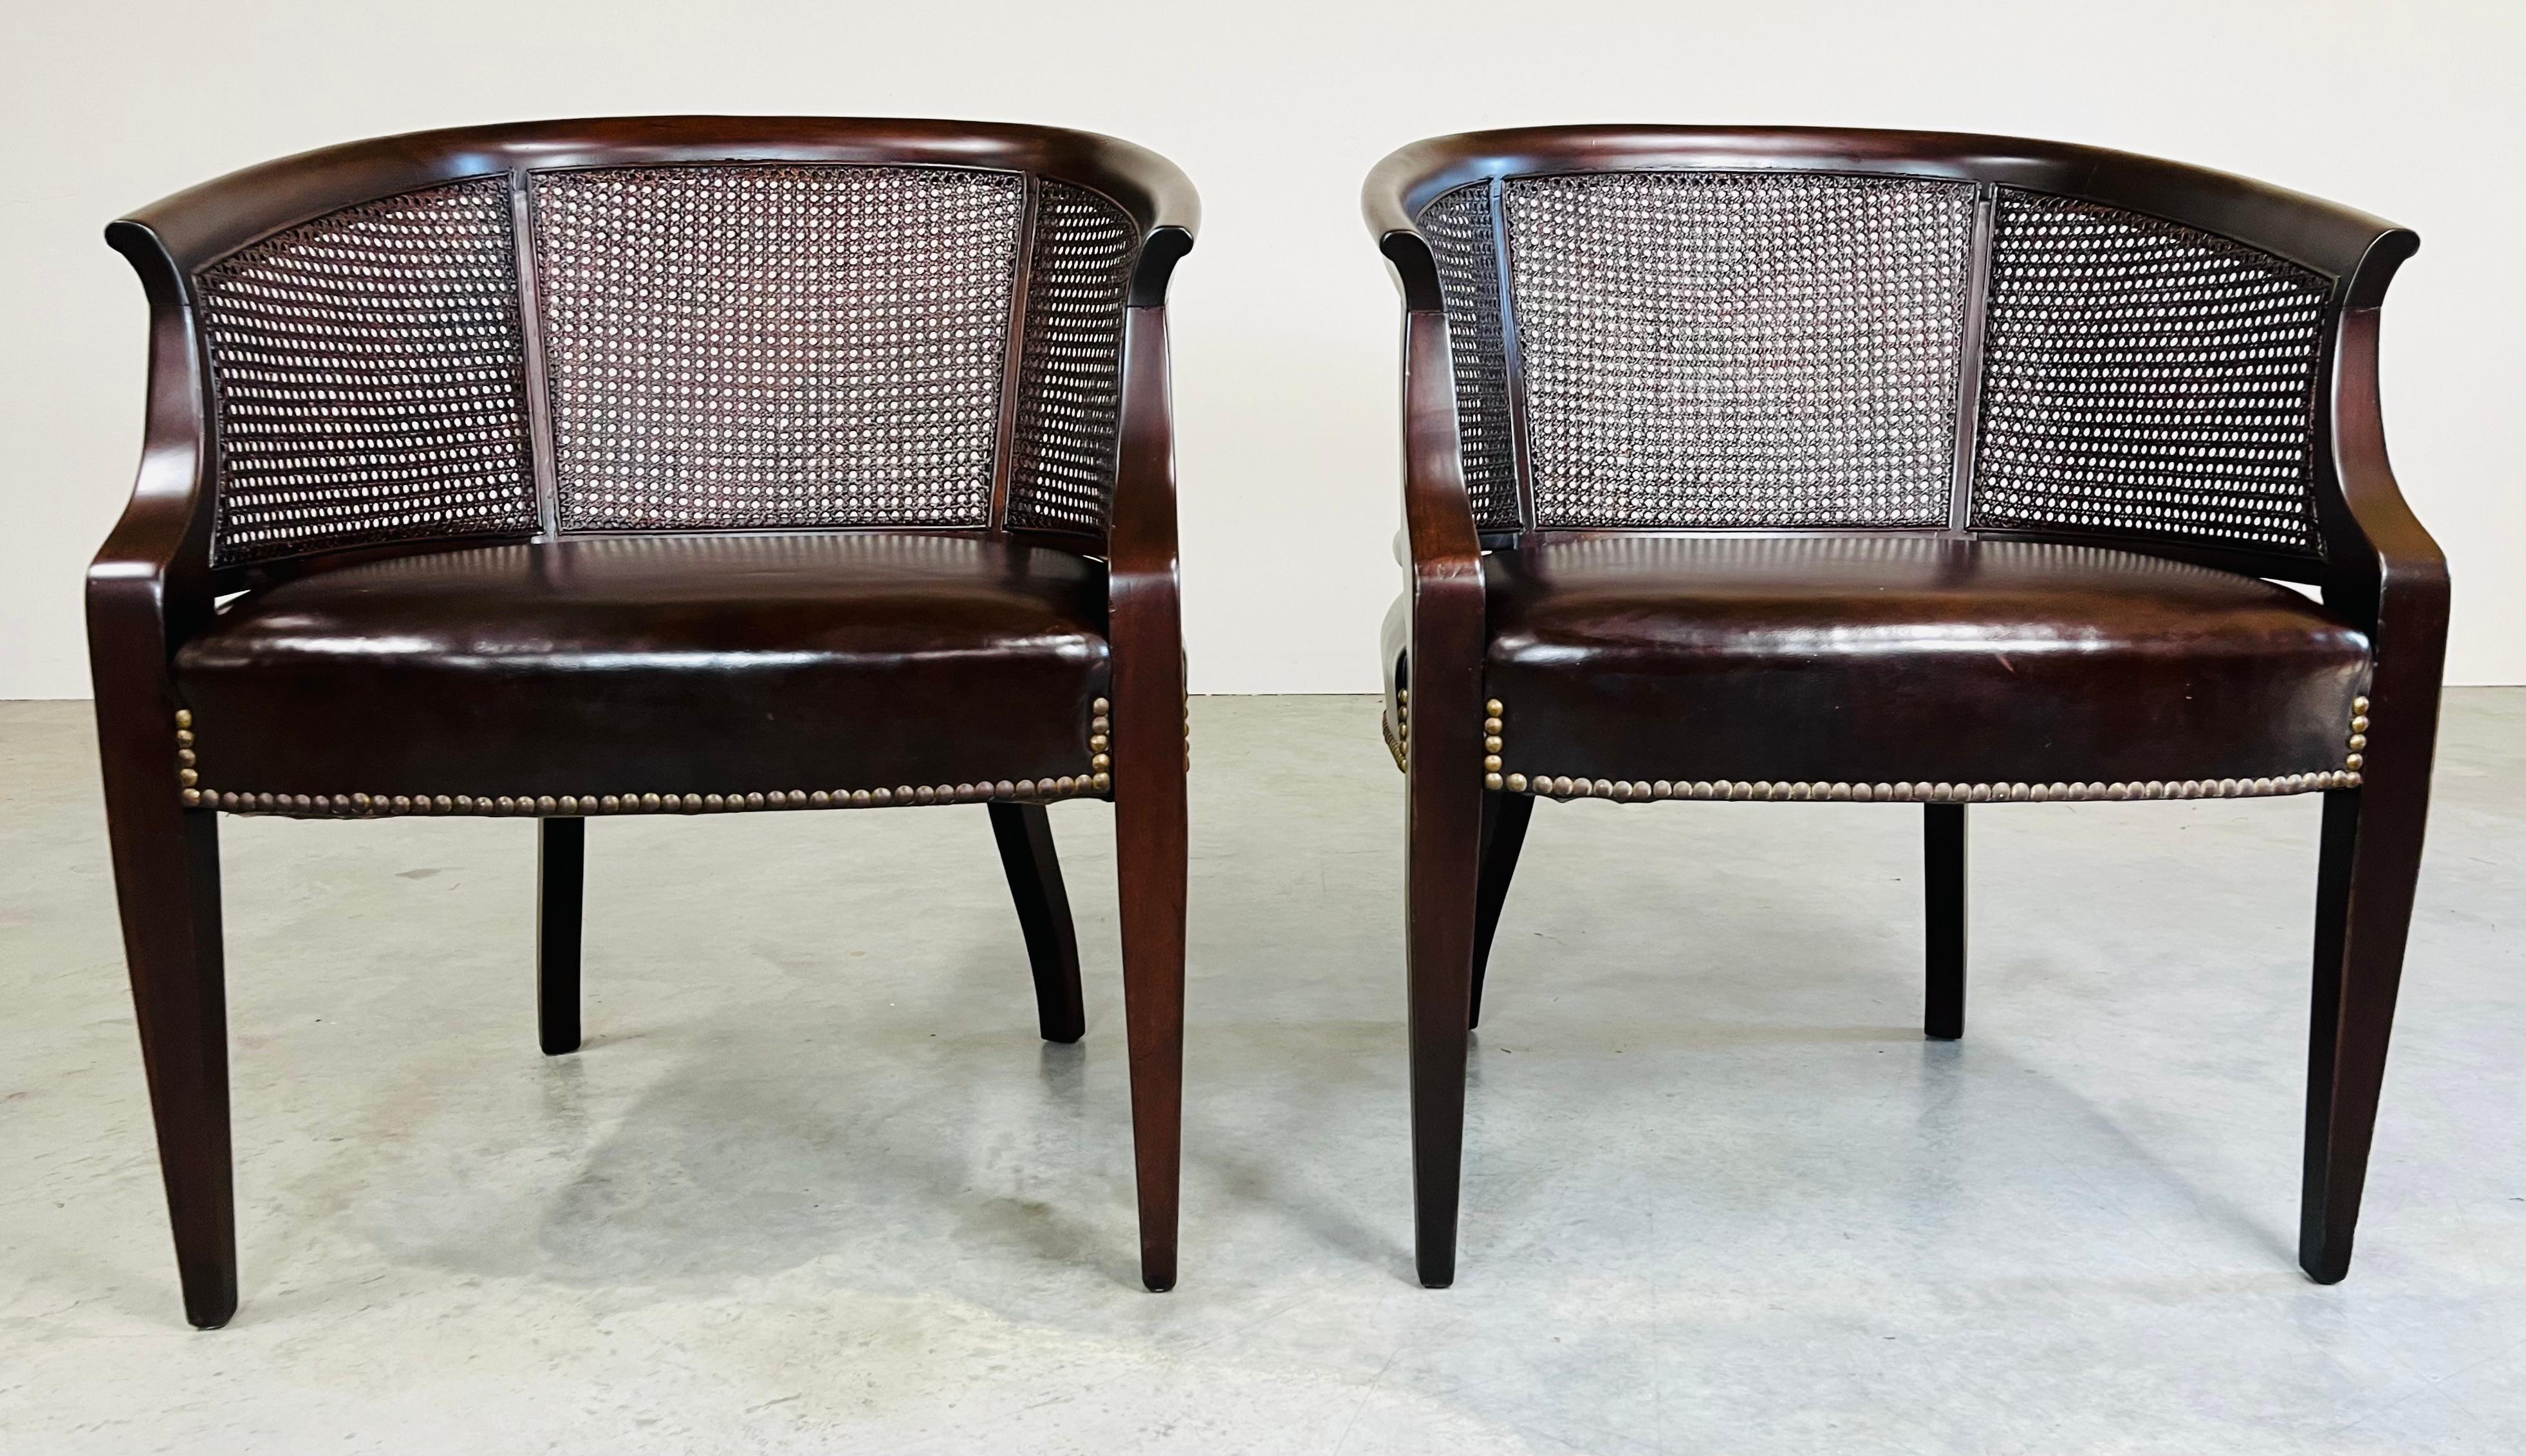 American Pair of Regency Hickory Chair Co. Cane Barrel Back Club Chairs Having Lithe Legs For Sale